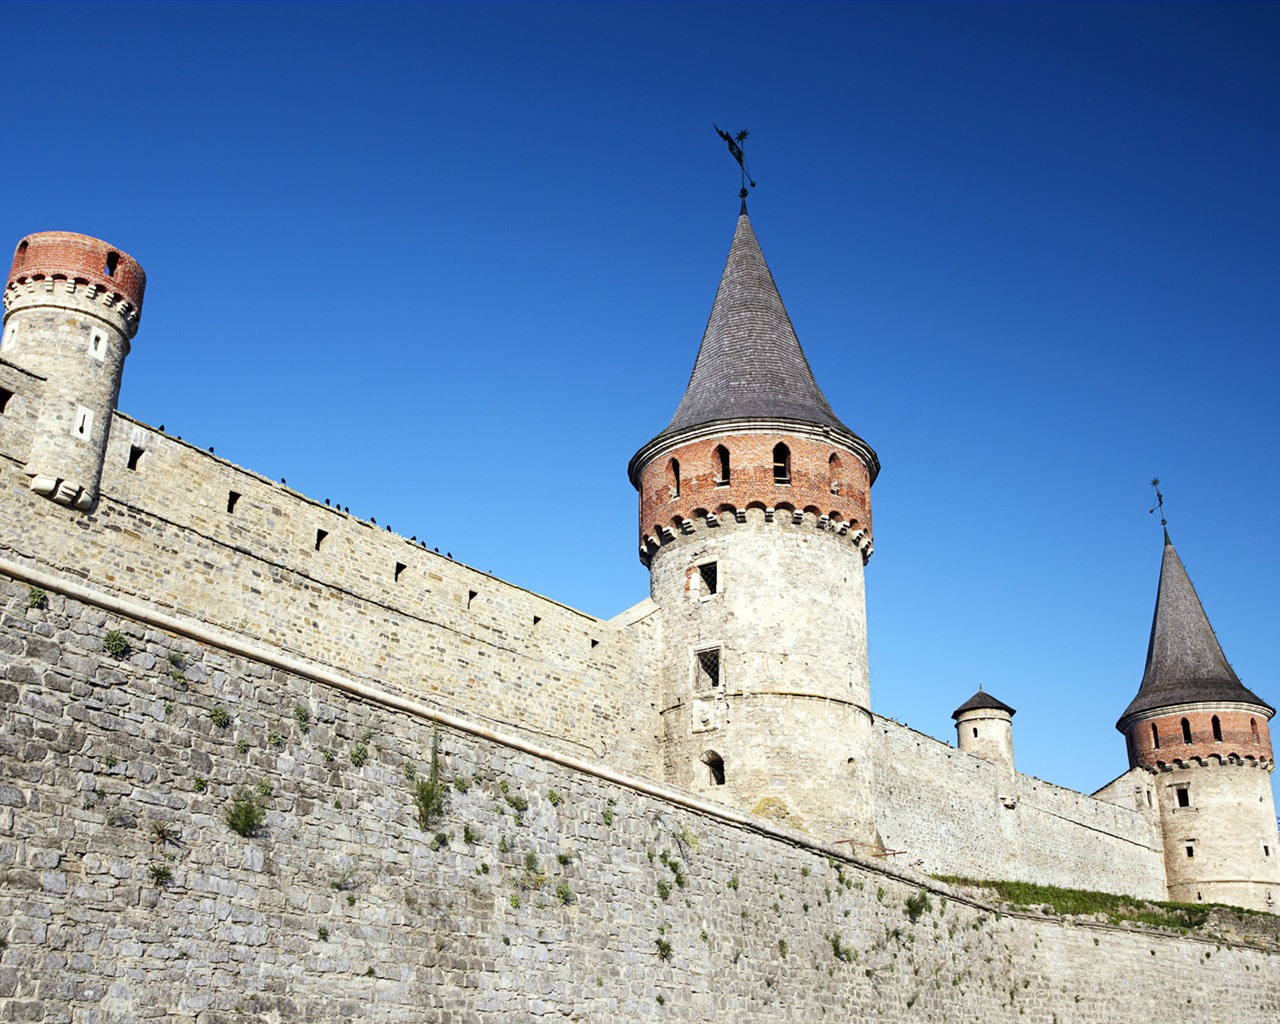 Windows 7 Wallpapers: Castles of Europe #21 - 1280x1024